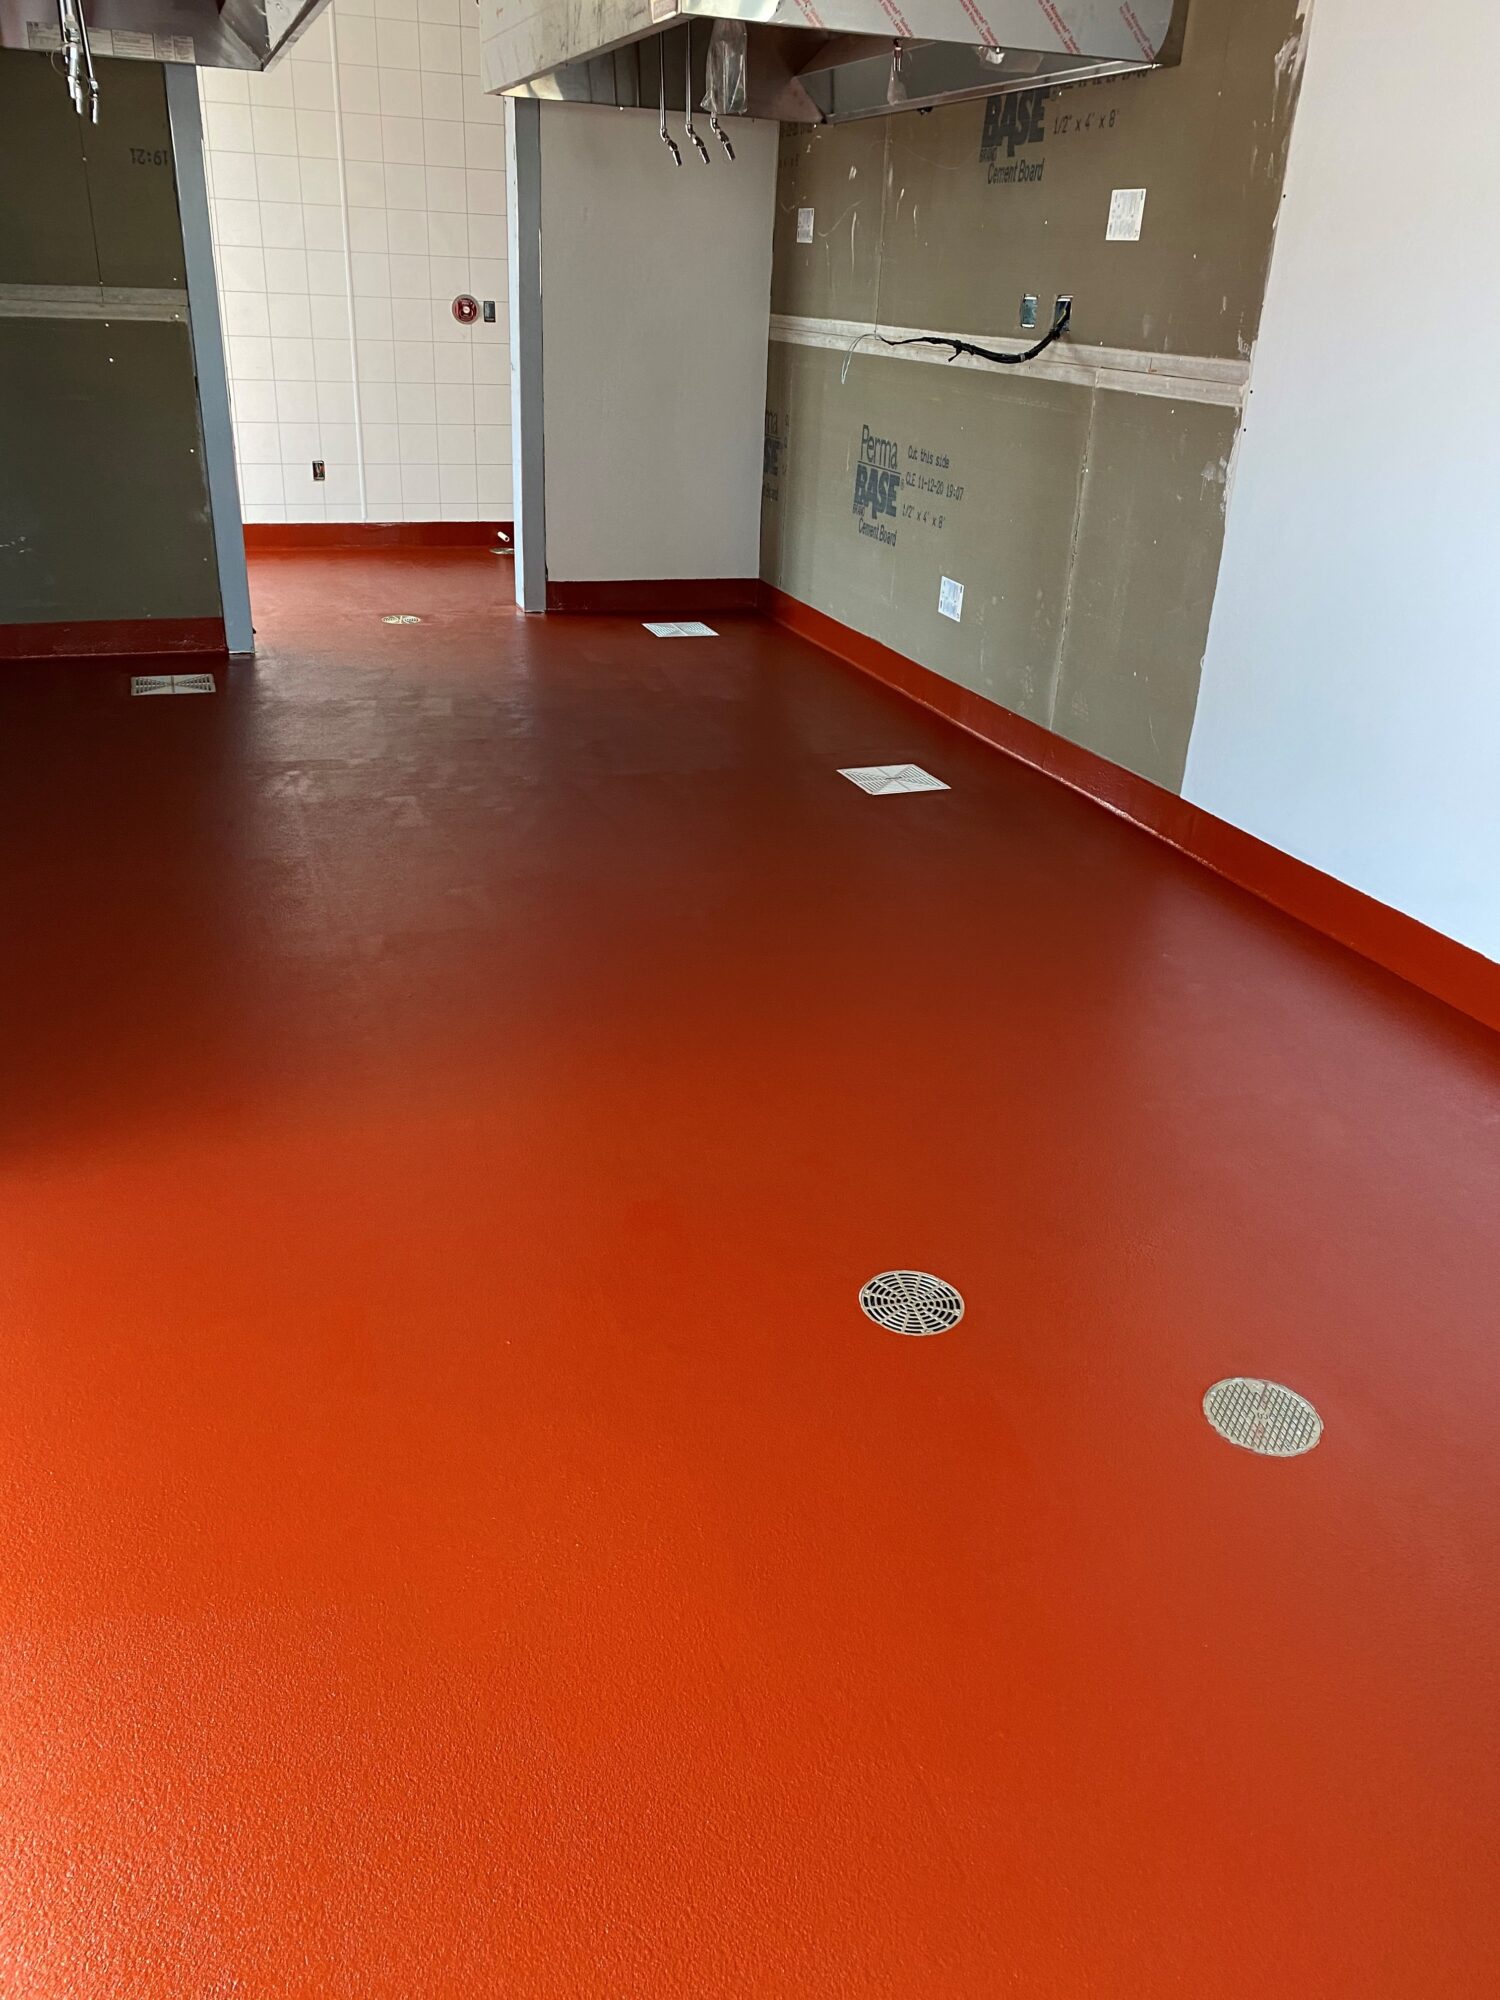 Urethane concrete, commercial kitchen, commercial kitchen flooring, epoxy floors FayettevilleAR, TeamIA, Industrial Applications Inc., IA30yrs